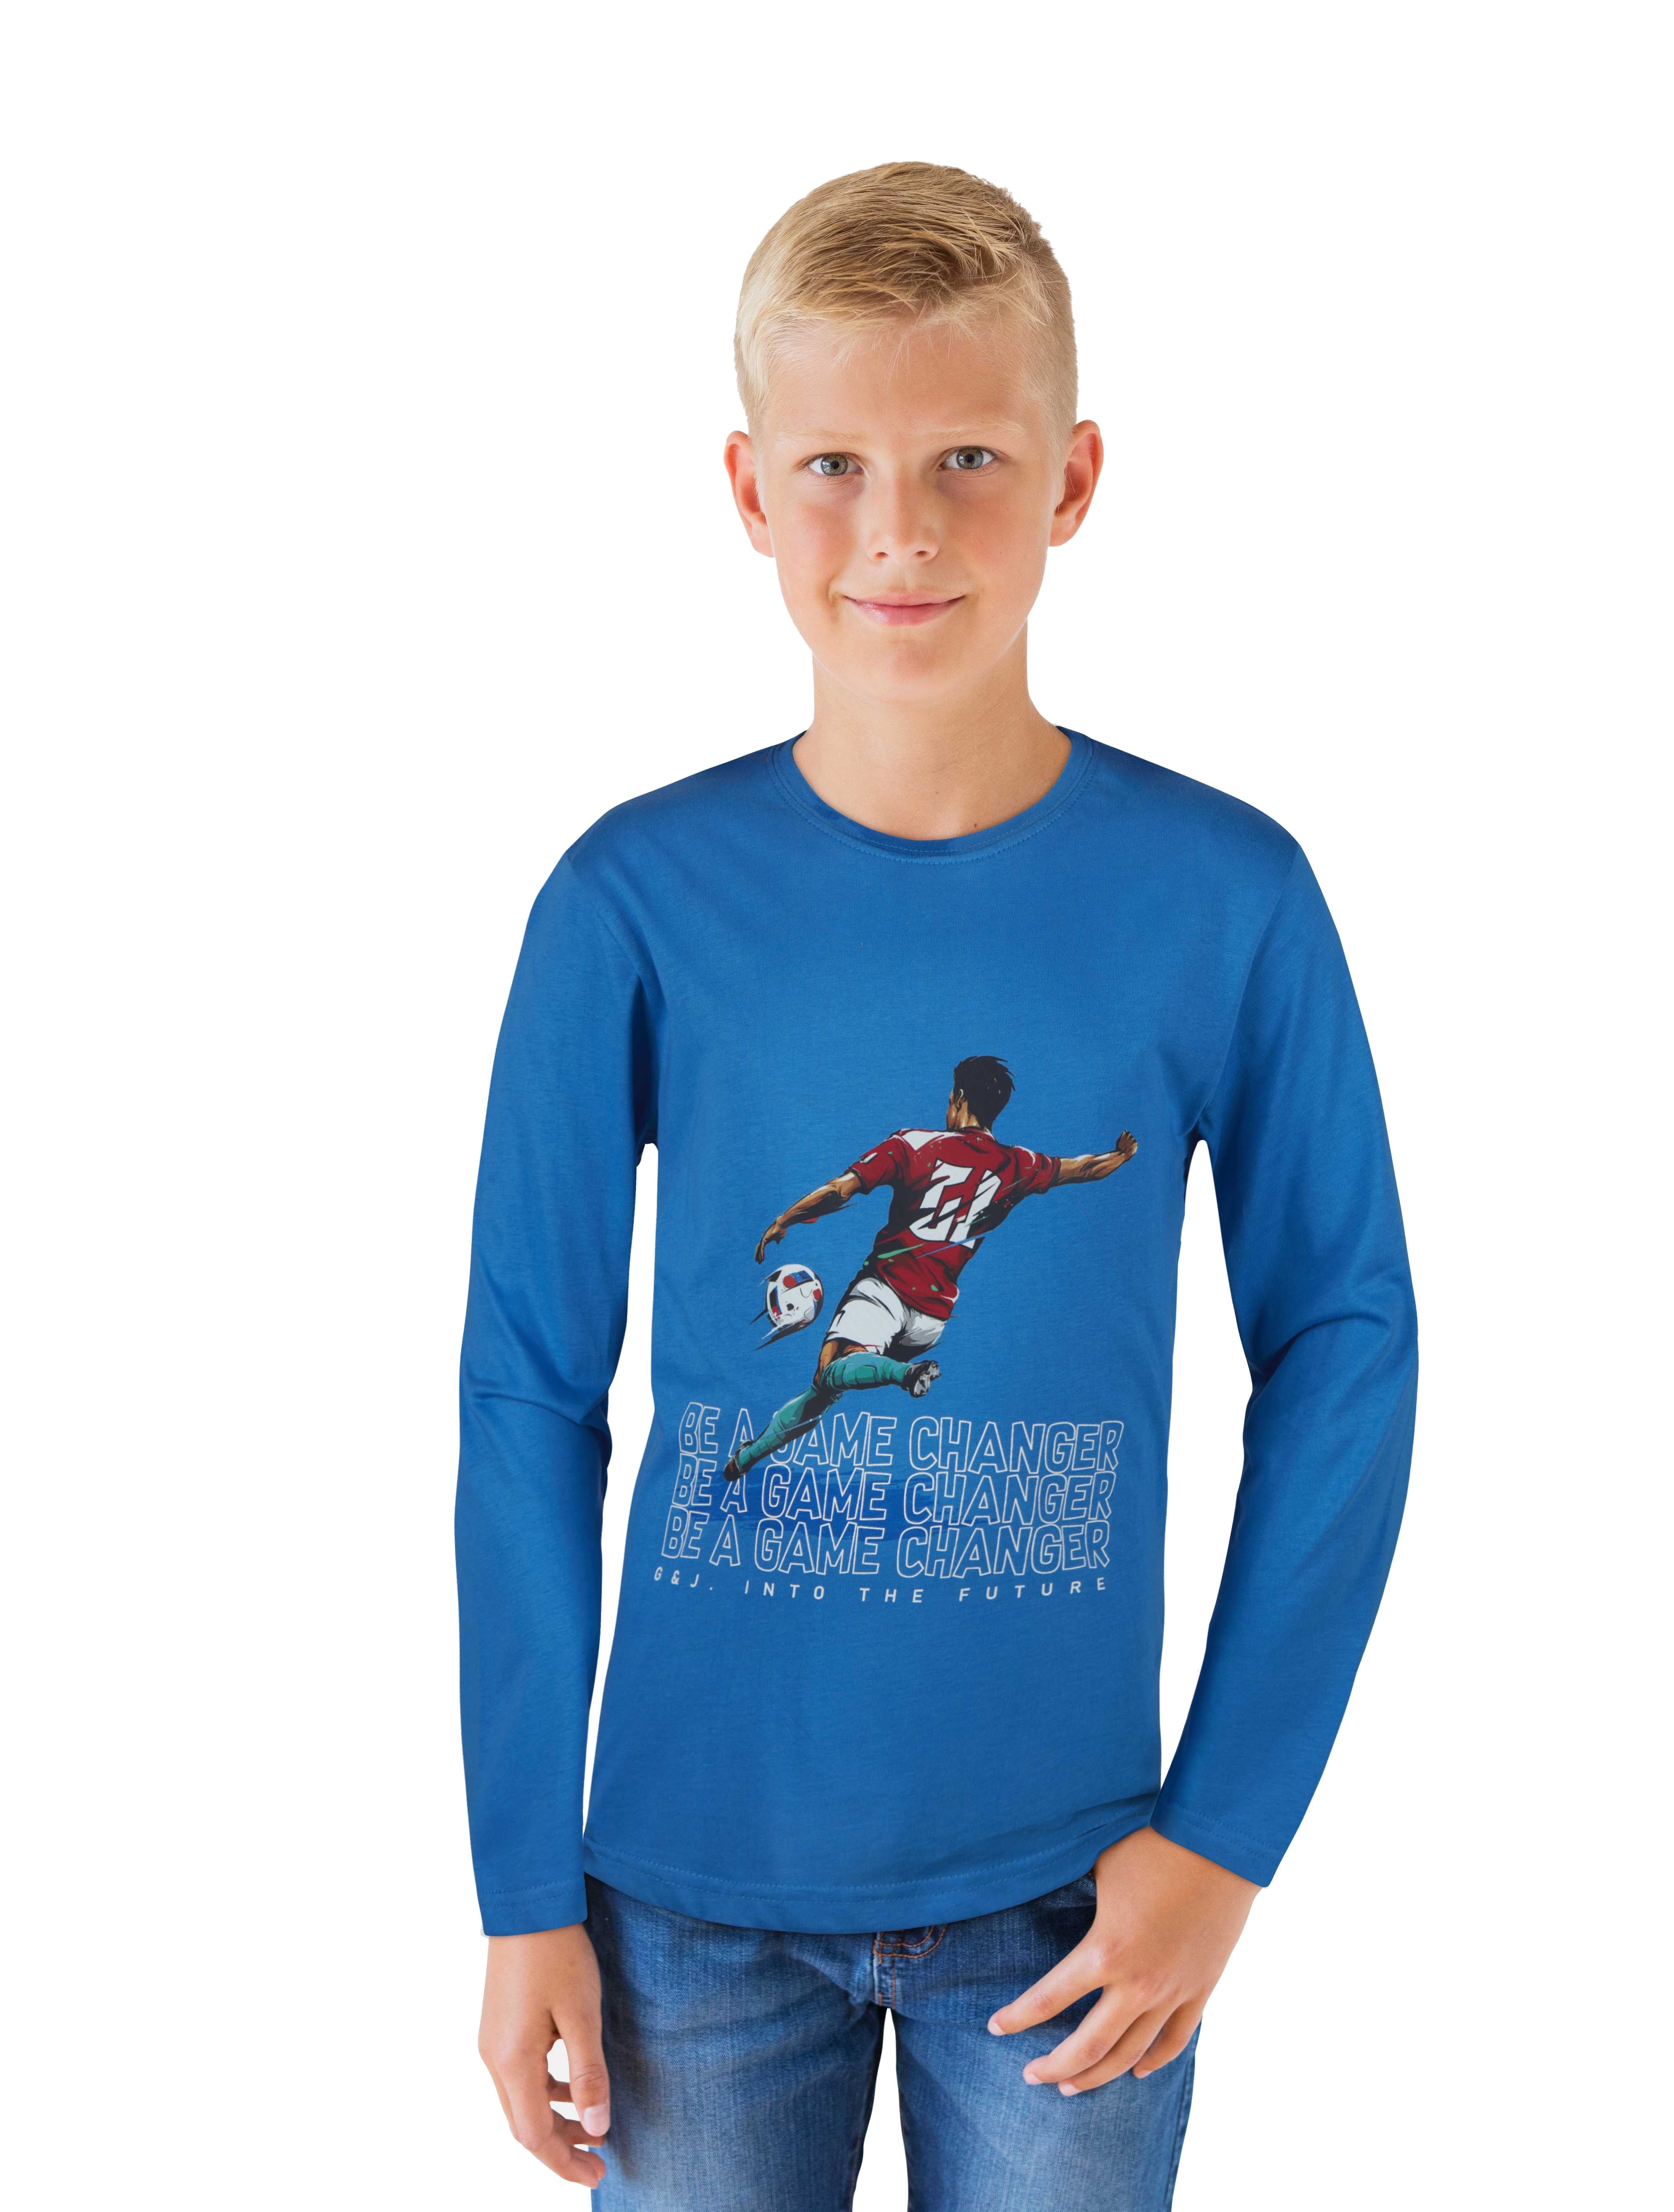 Boys blue round neck knitted cotton printed sweat activated t-shirt